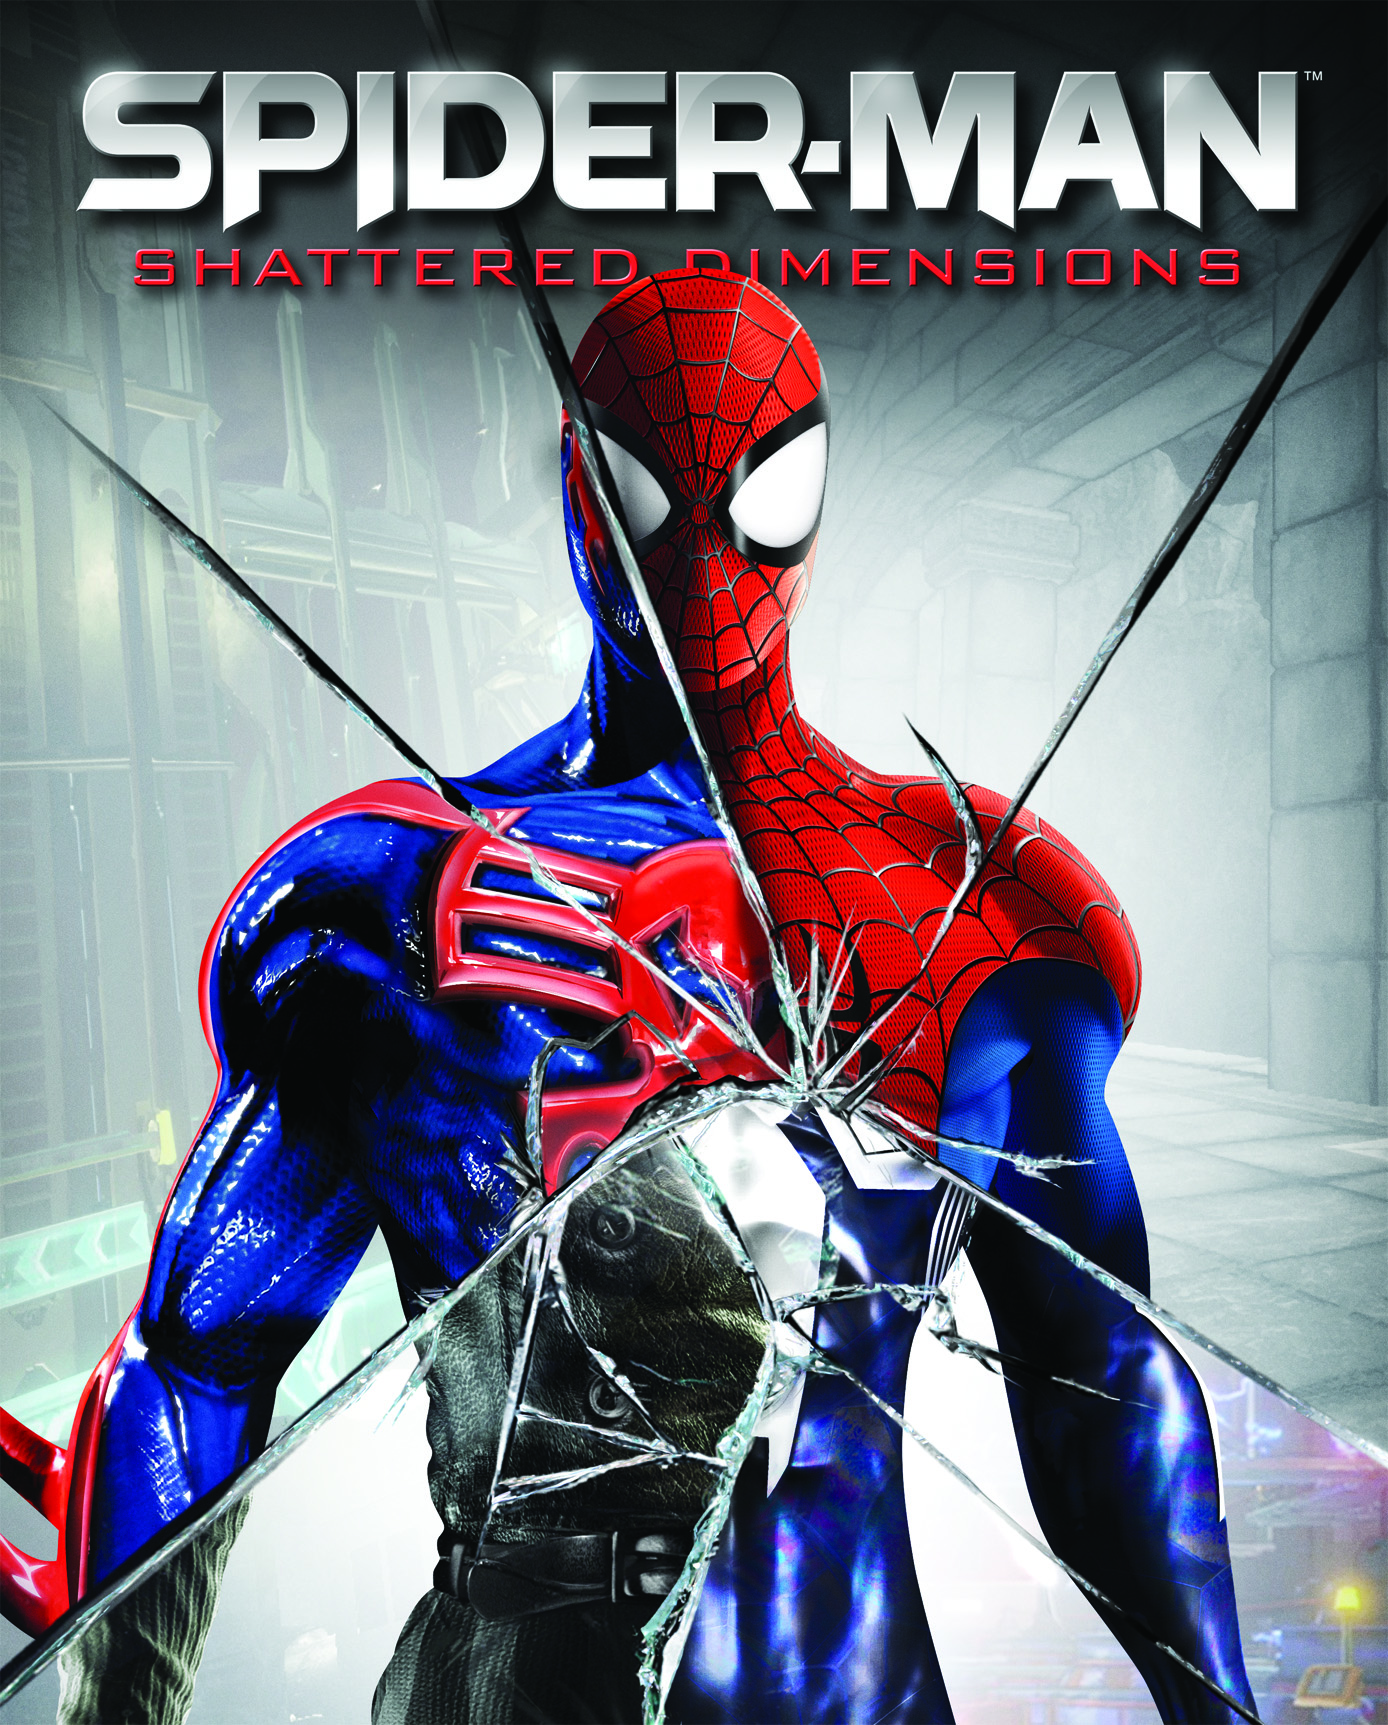 Spider-Man: Shattered Dimensions Backgrounds, Compatible - PC, Mobile, Gadgets| 1388x1725 px